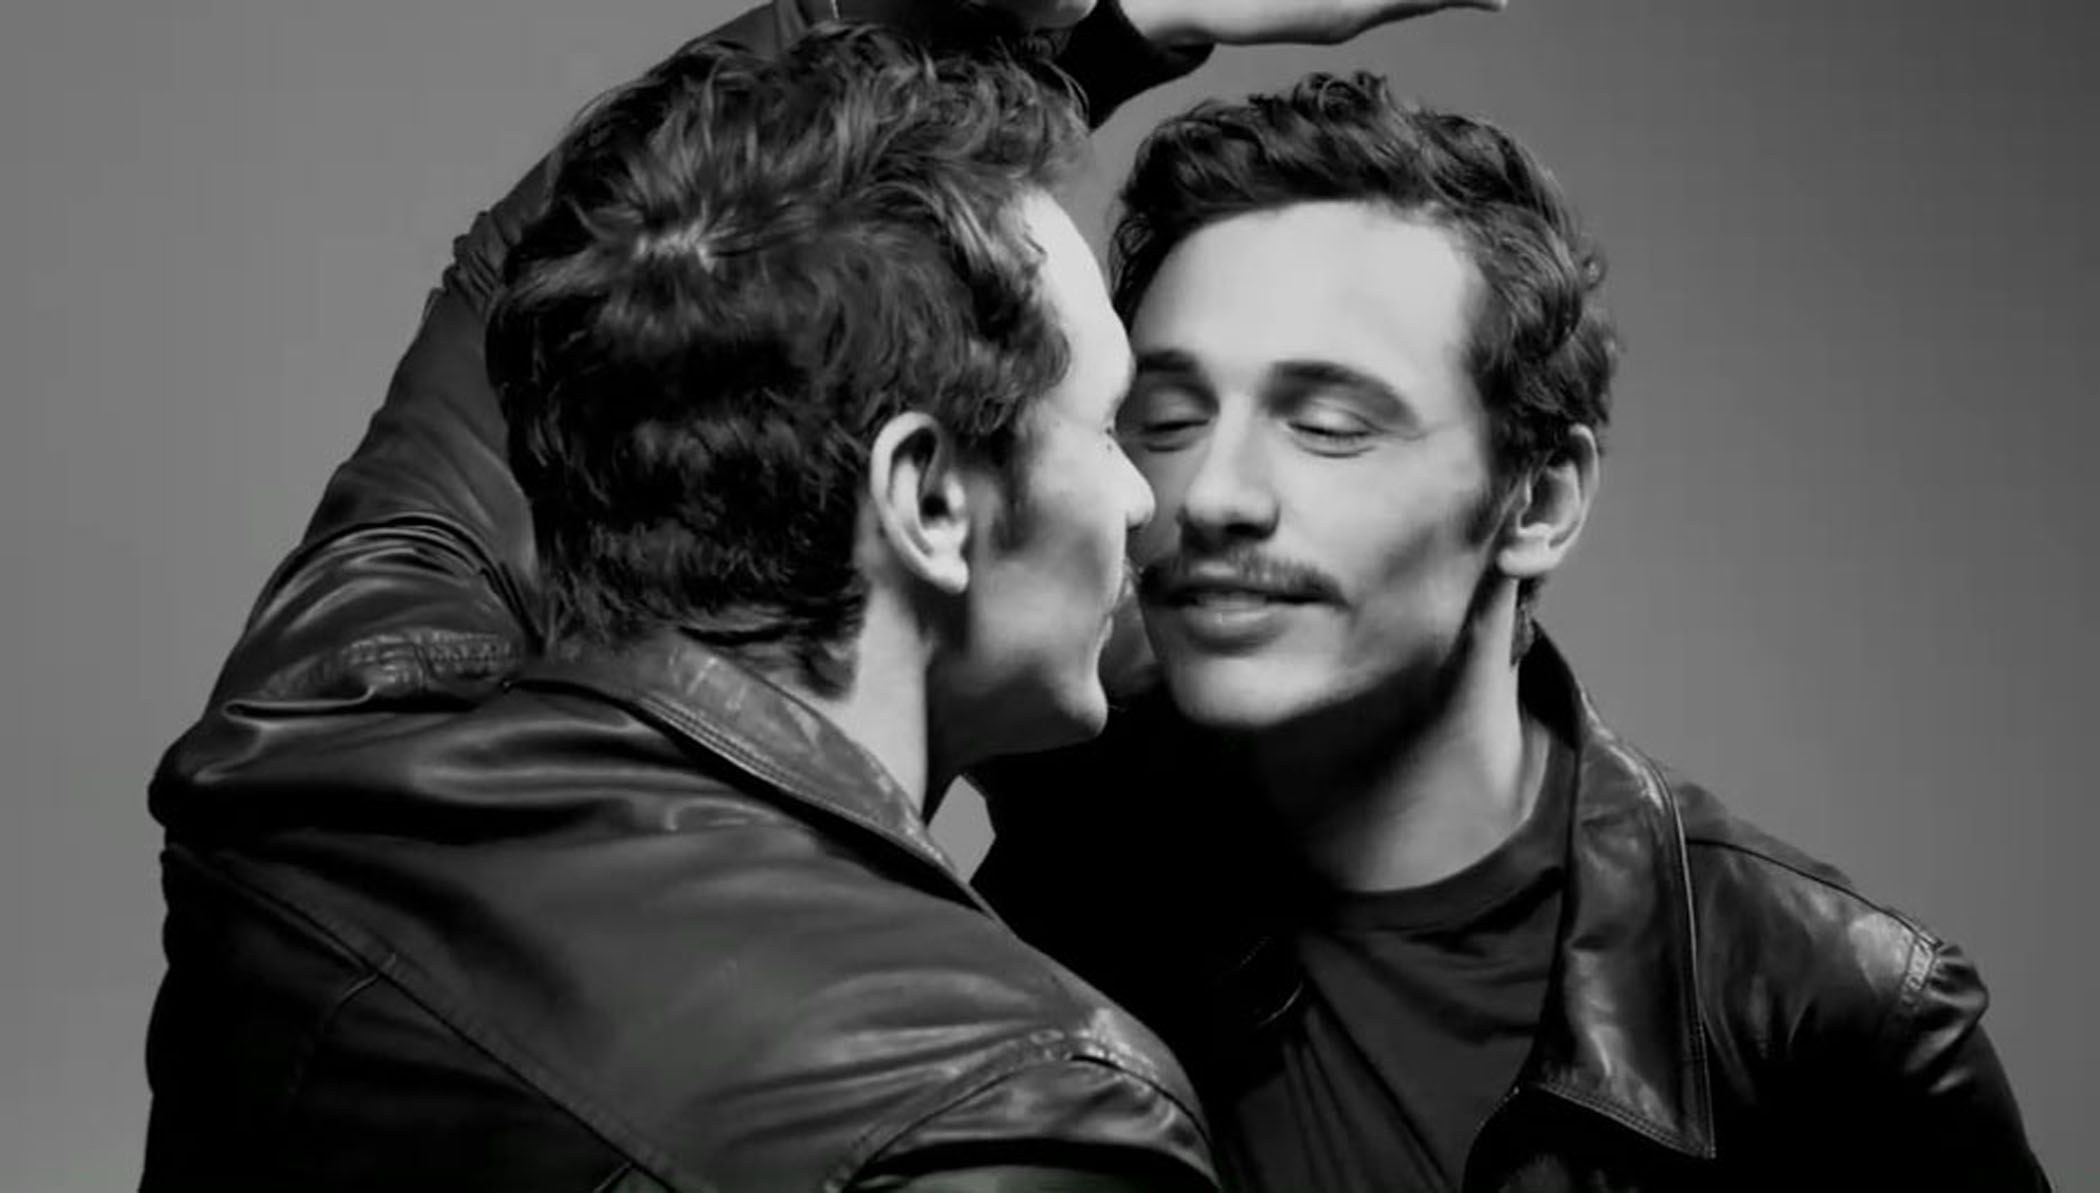 Gallery For Gt James Franco Black And White Wallpaper